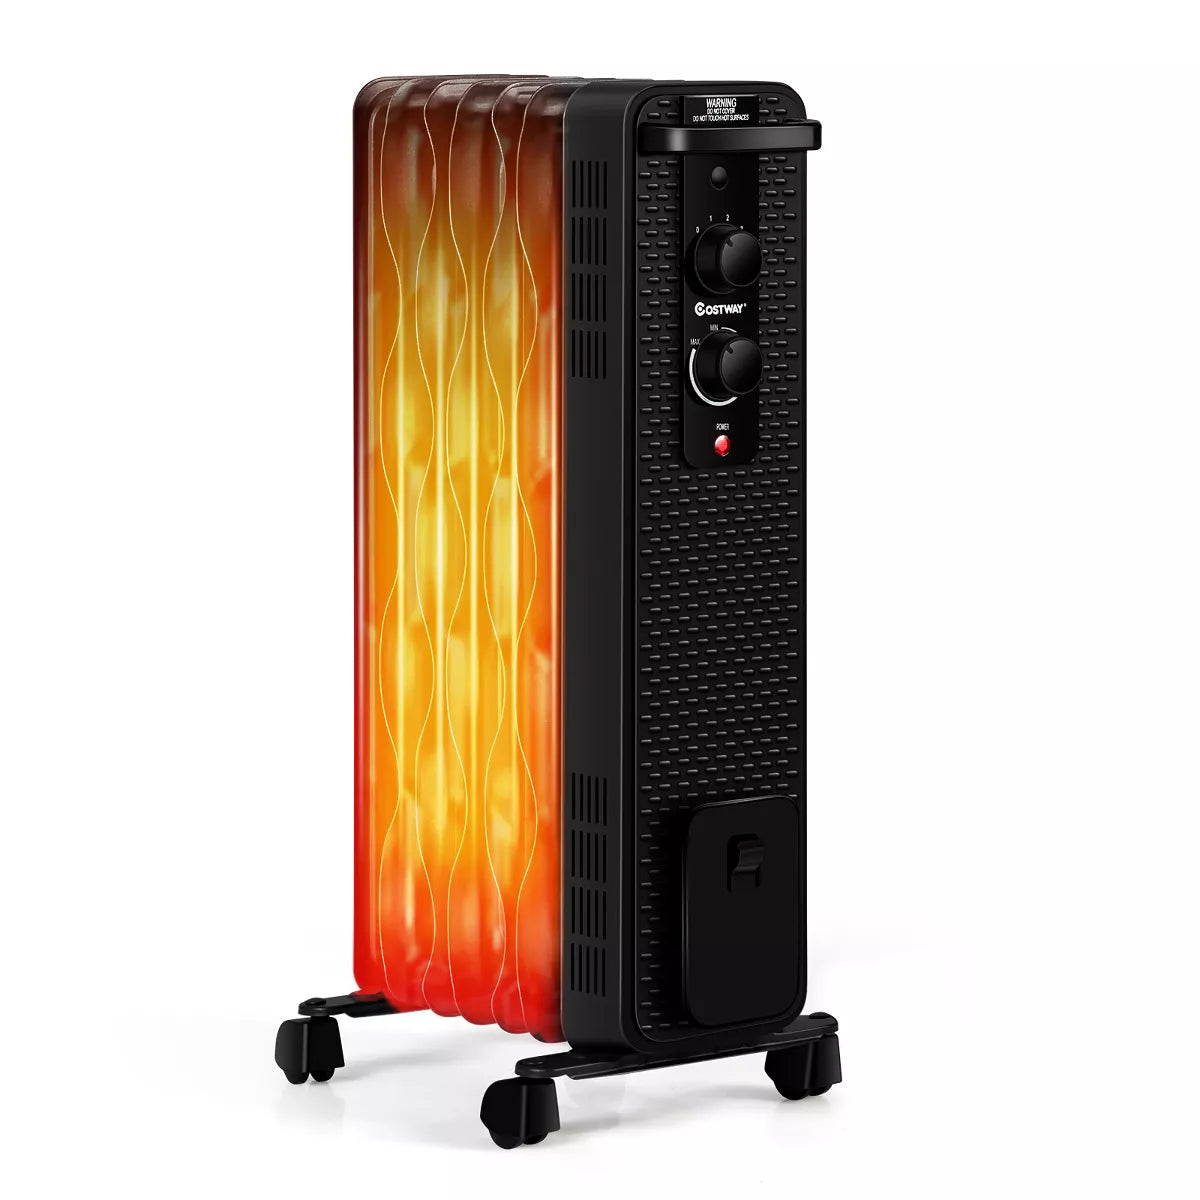 1500W Oil-Filled Heater Portable Radiator Space Heater w/ Adjustable Thermostat White\ Black